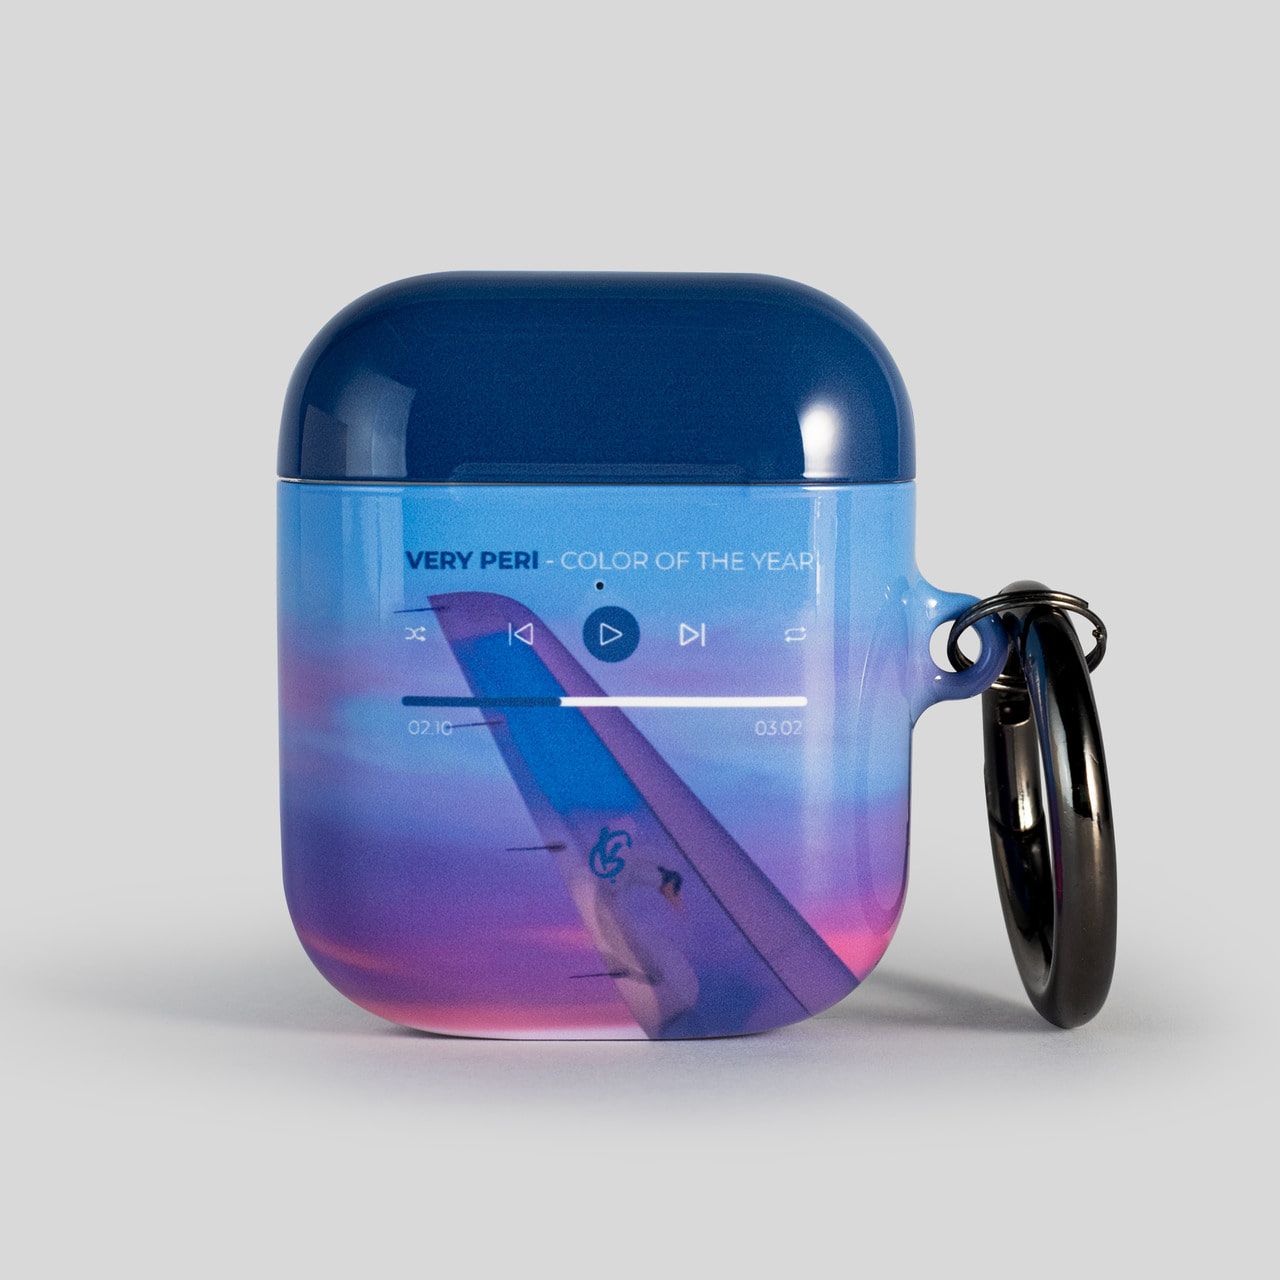 [Airpods cases] COLOR OF THE YEAR No.17